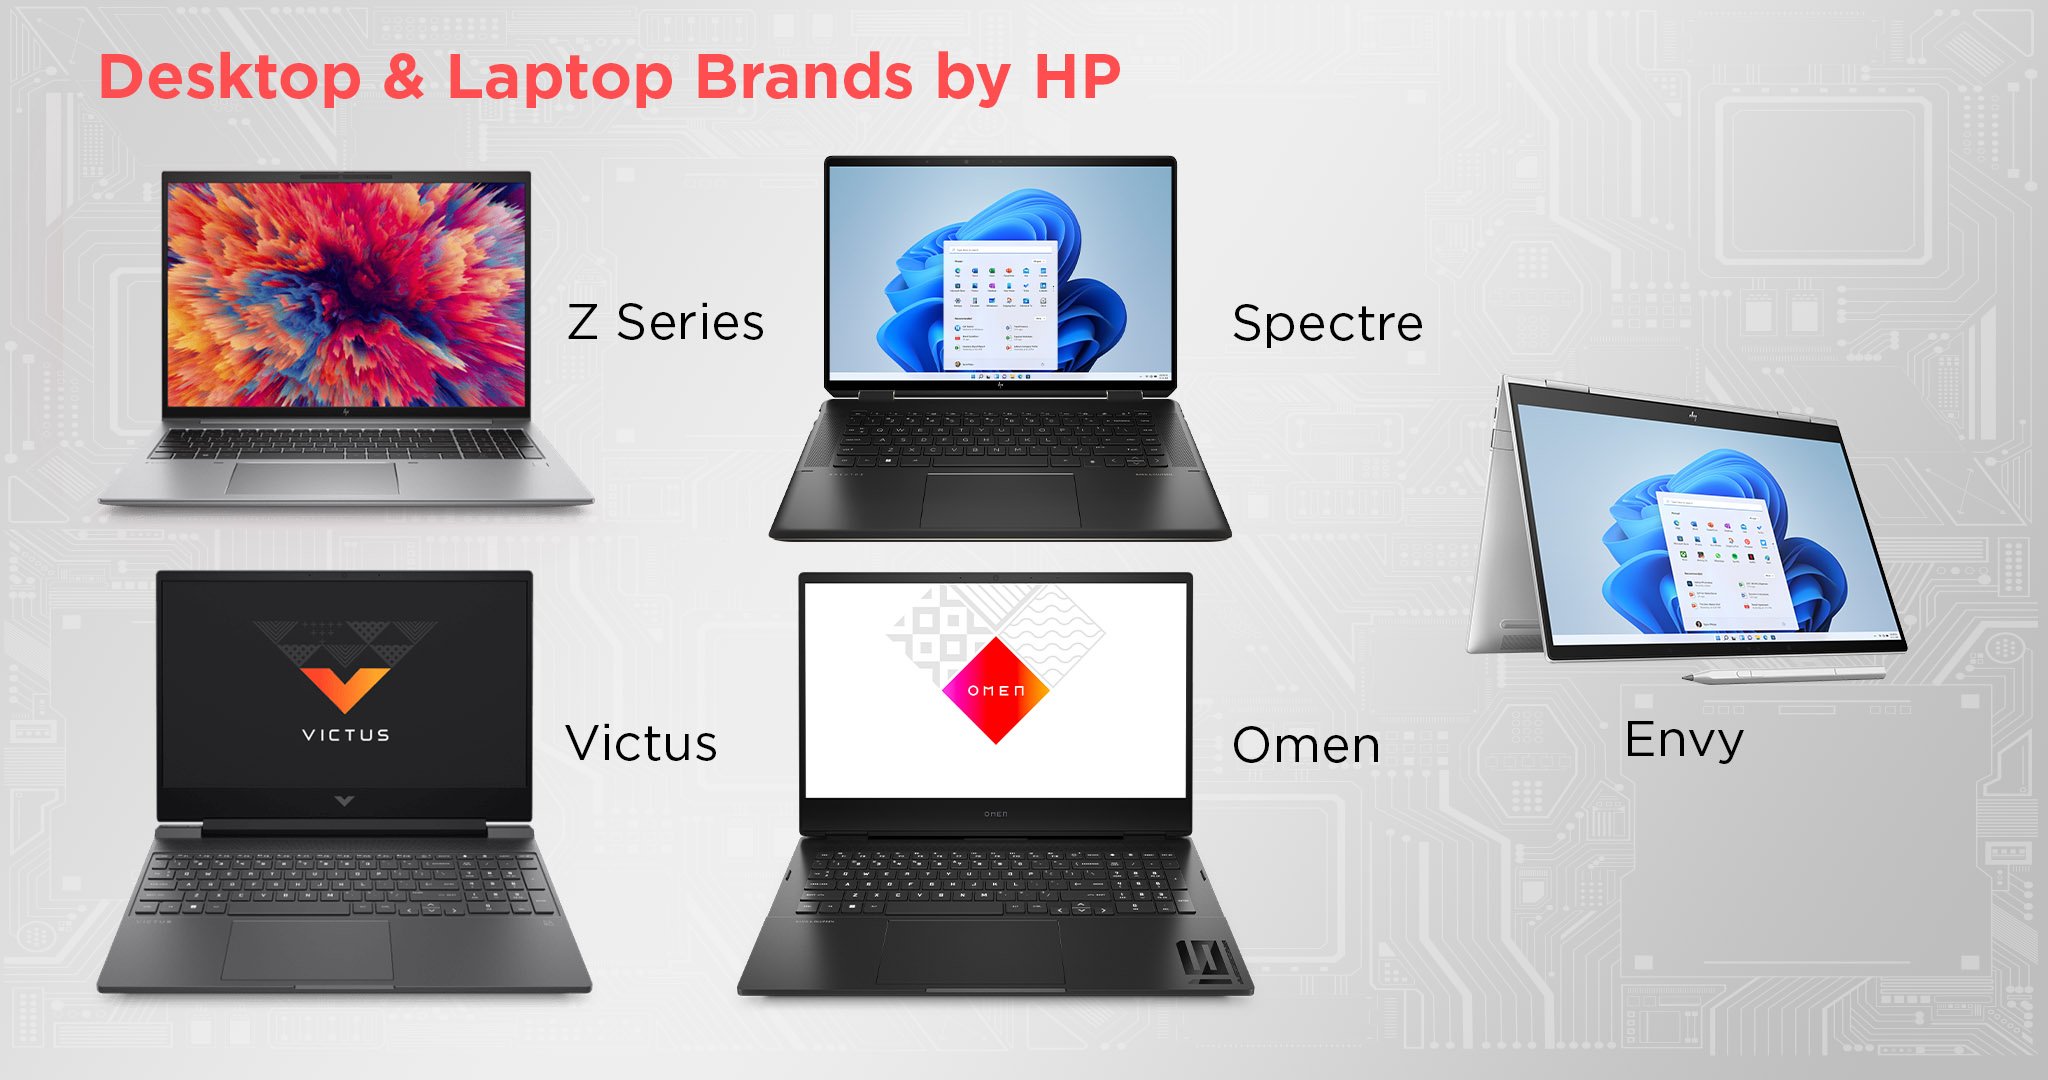 Dell vs. HP Laptops - Which Brand Best Fits Your Needs?